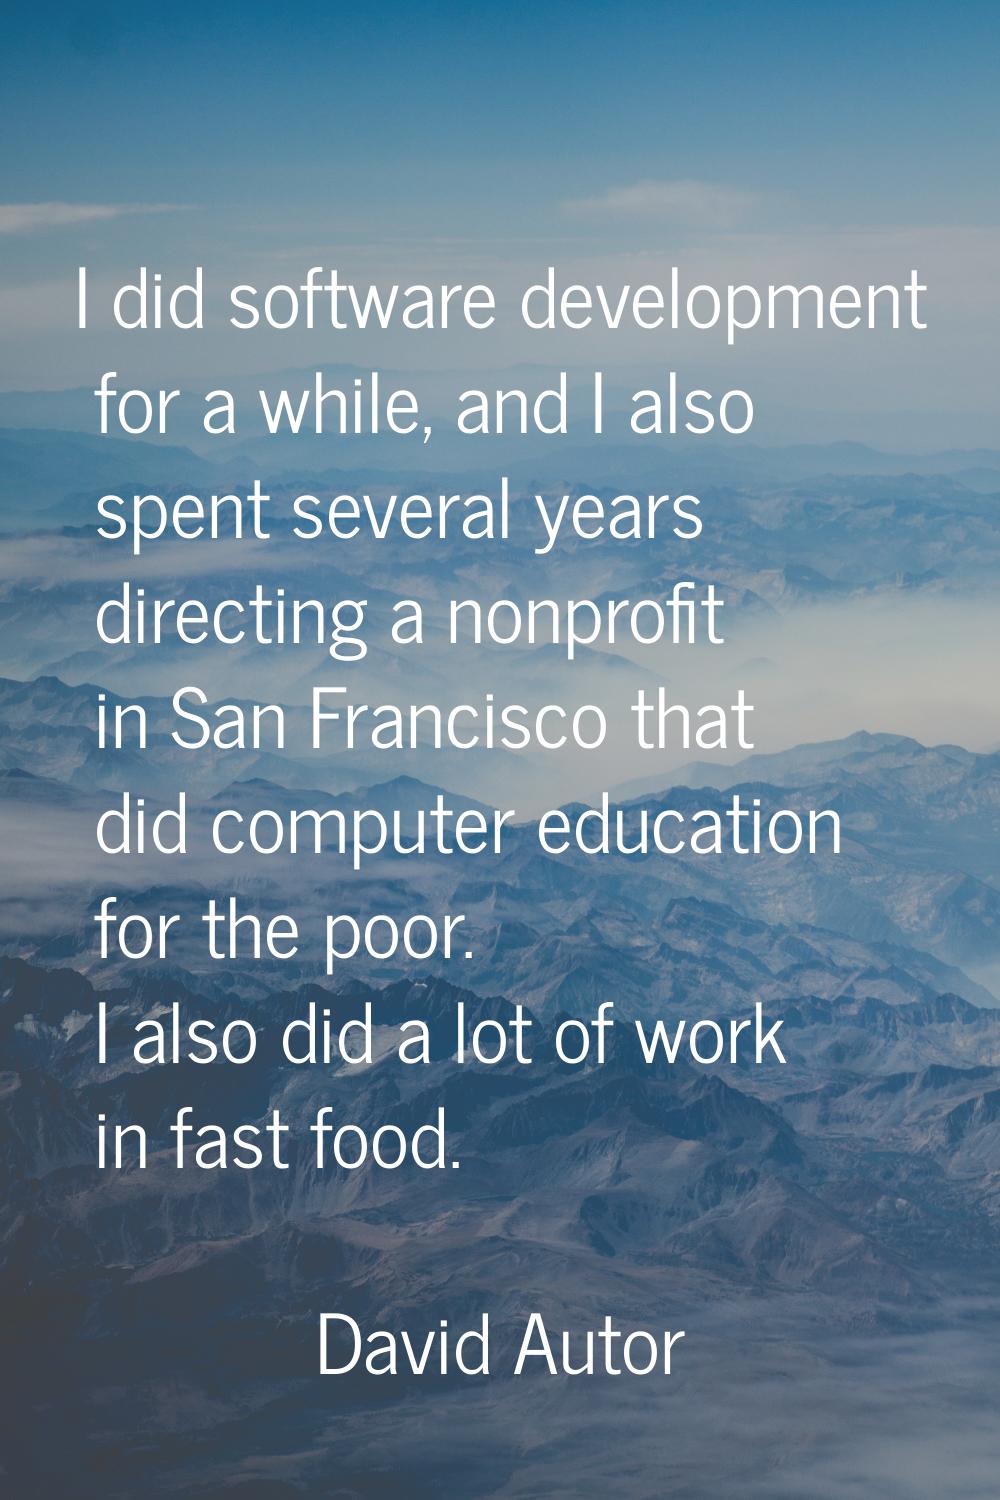 I did software development for a while, and I also spent several years directing a nonprofit in San